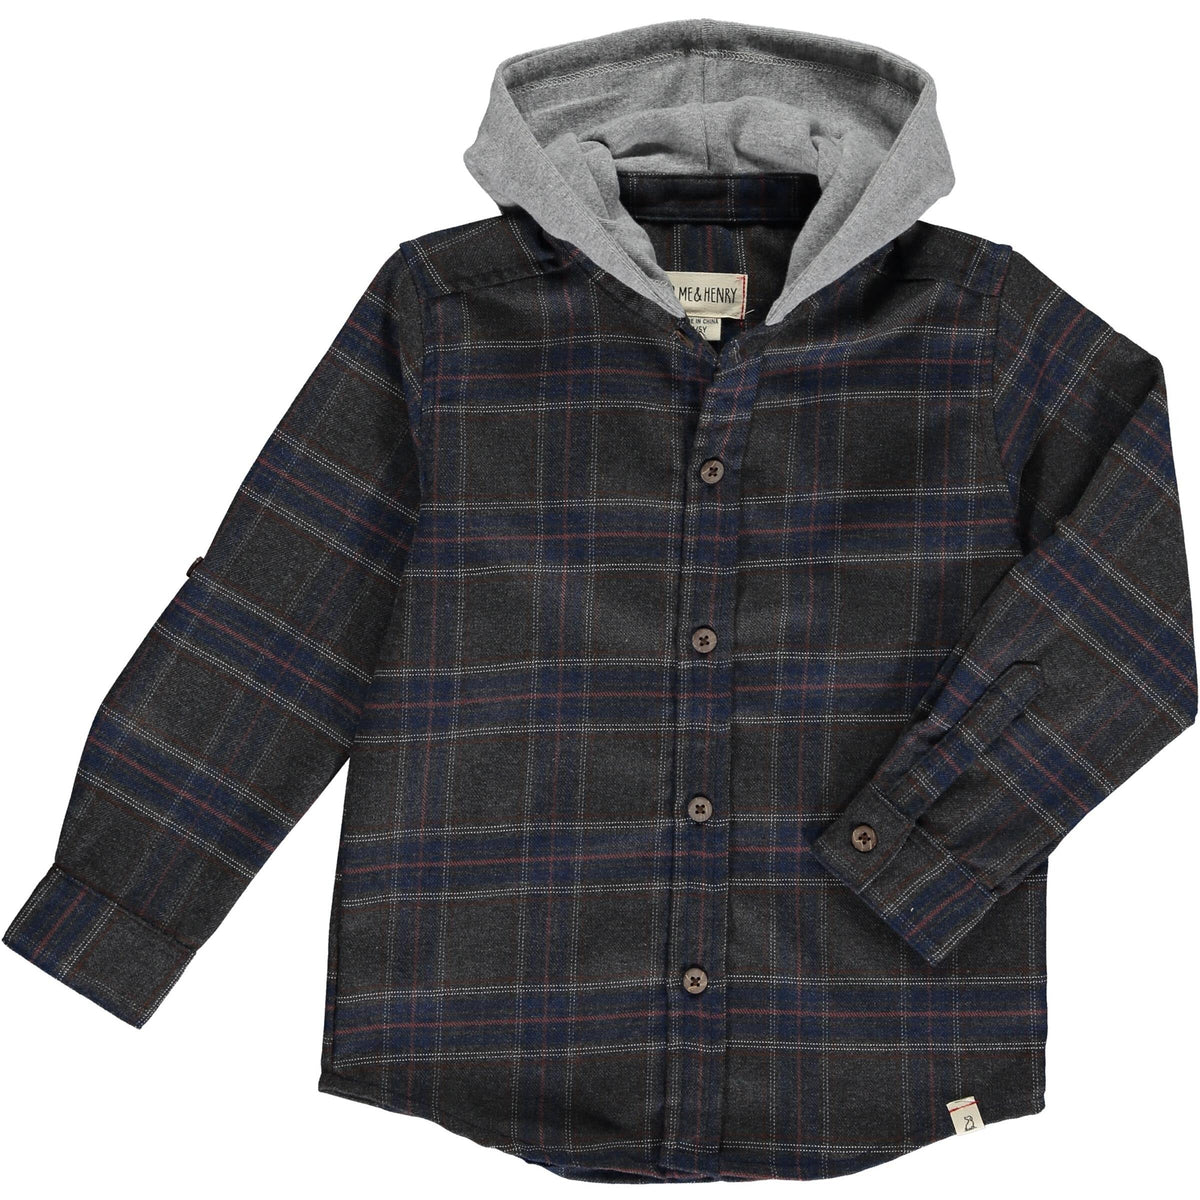 Me & Henry Erin Hooded Woven Shirt | Charcoal/Blue Plaid